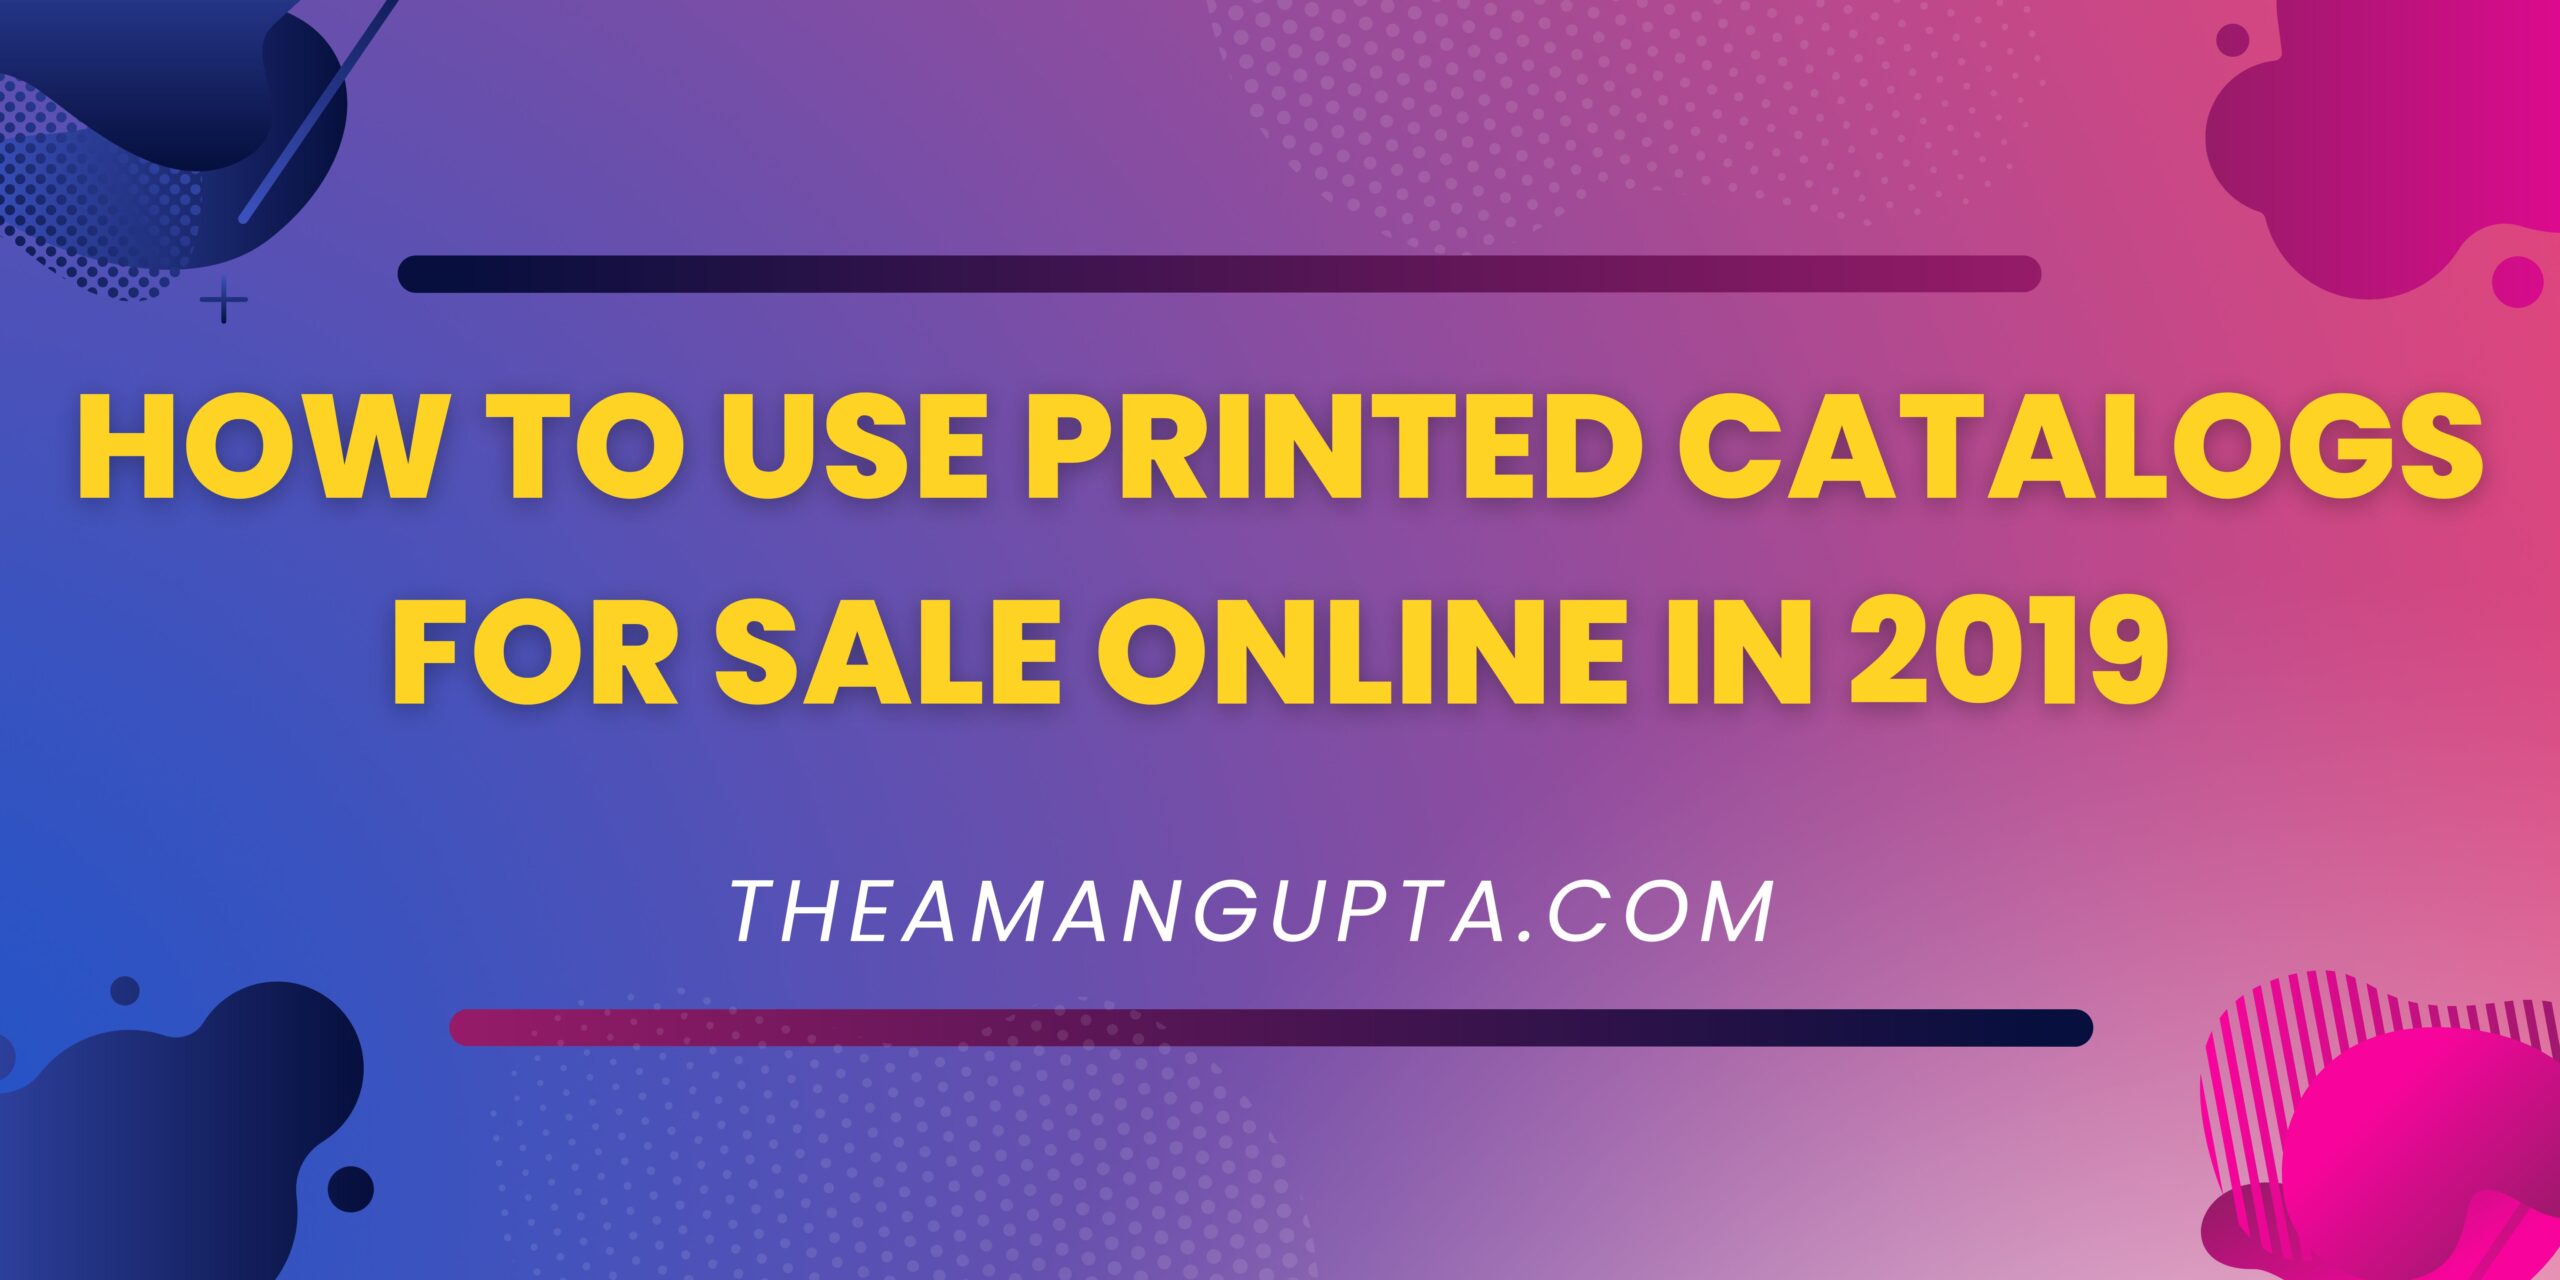 How To Use Printed Catalogs For Sale Online In 2019|Printed Catalogues|Theamangupta|Theamangupta